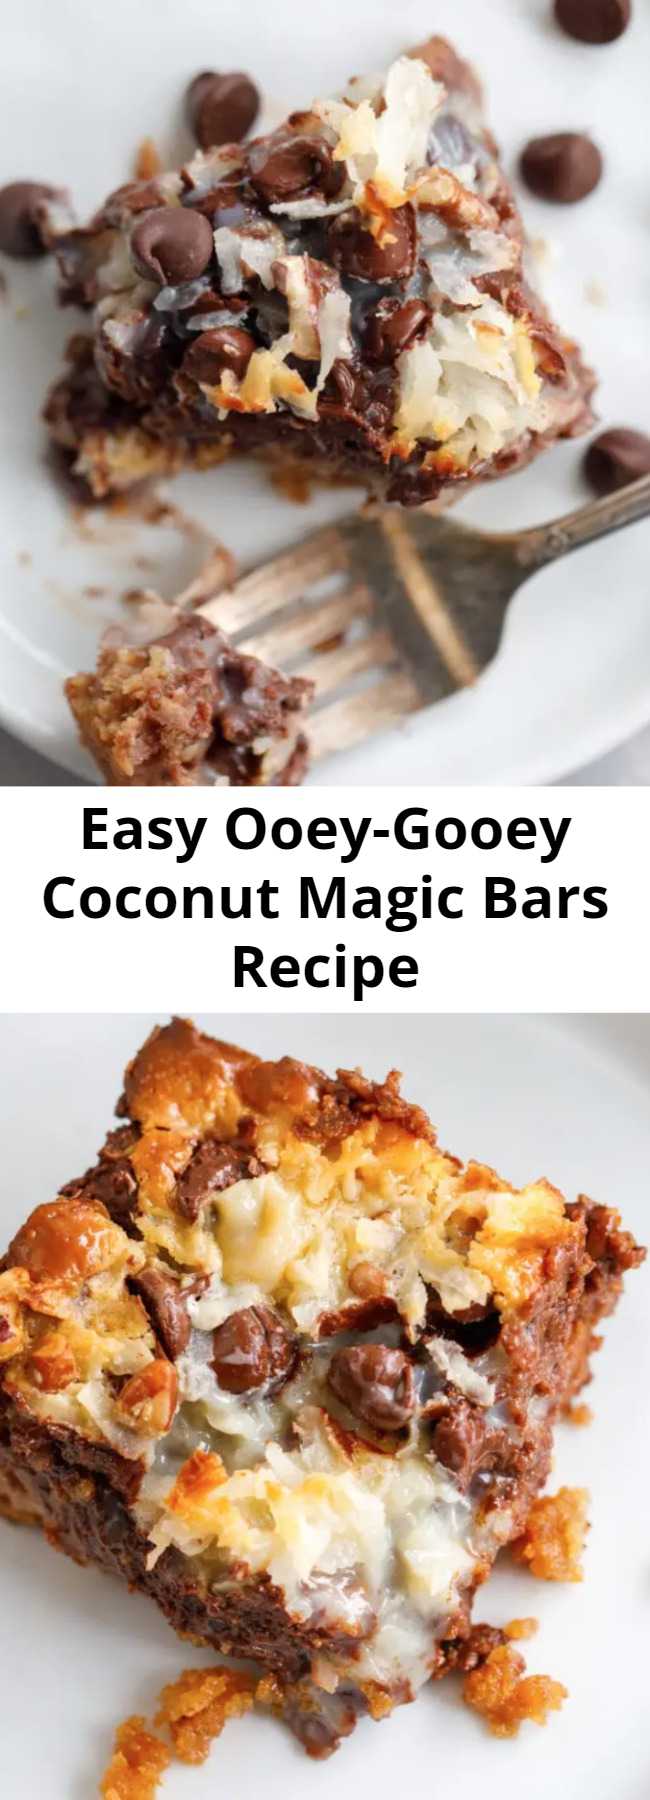 7 Layer Bars - Easy Coconut Magic Bars Recipe - These coconut magic bars are so easy to make that it’s almost funny. It doesn’t seem like something so TASTY could result from layering a few ingredients in a baking dish. Y’all, these coconut magic bars are like HEAVEN. These ooey-gooey coconut magic cookie bars are my favorite dessert EVER! #Dessert #Coconut #Bars